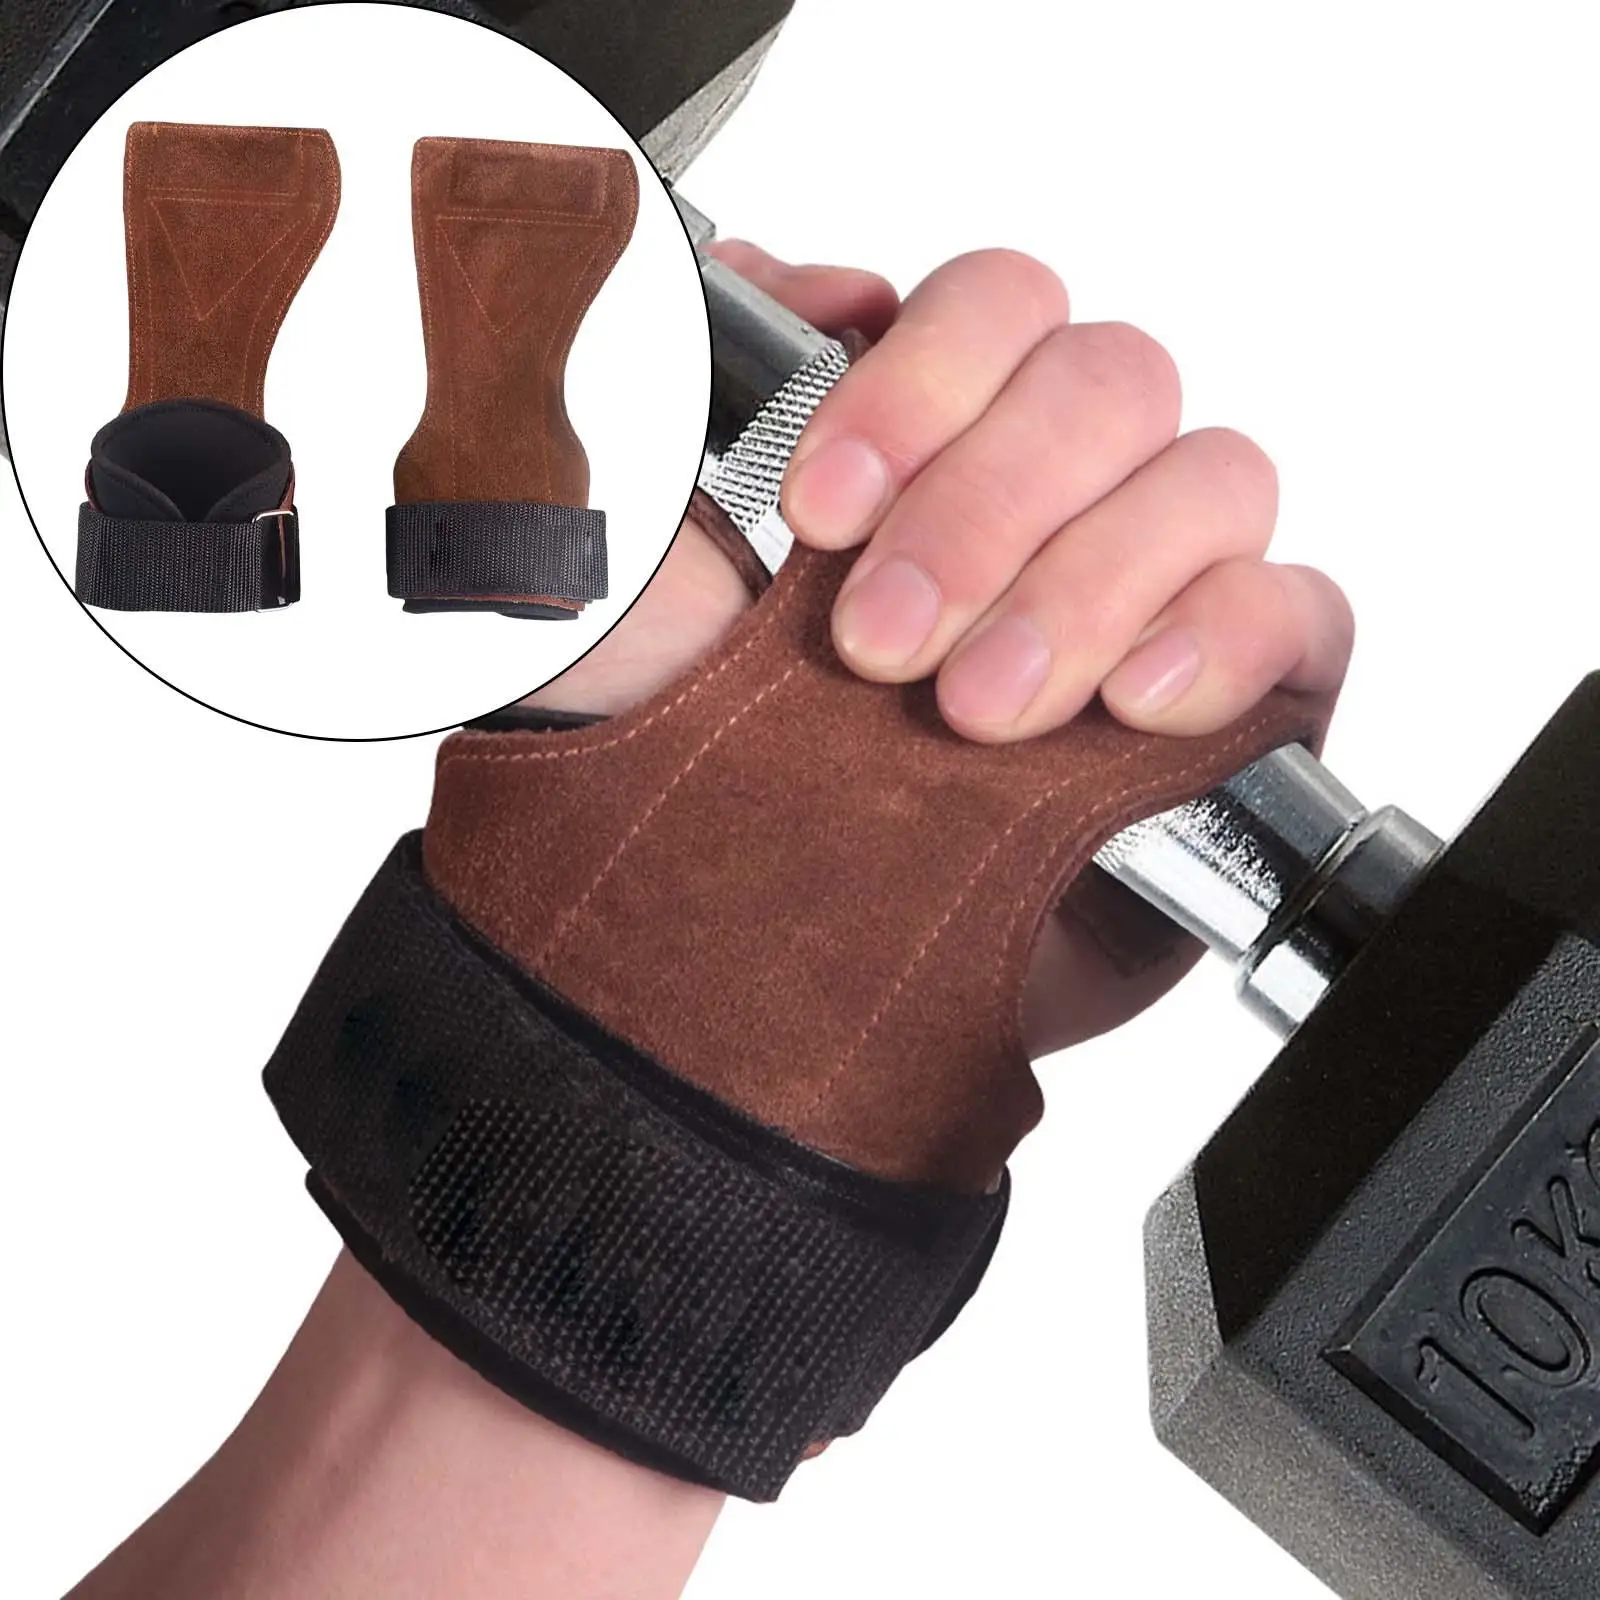 Weight Lifting Hand Grips with Wrist Straps for Strength Training Dumbbell